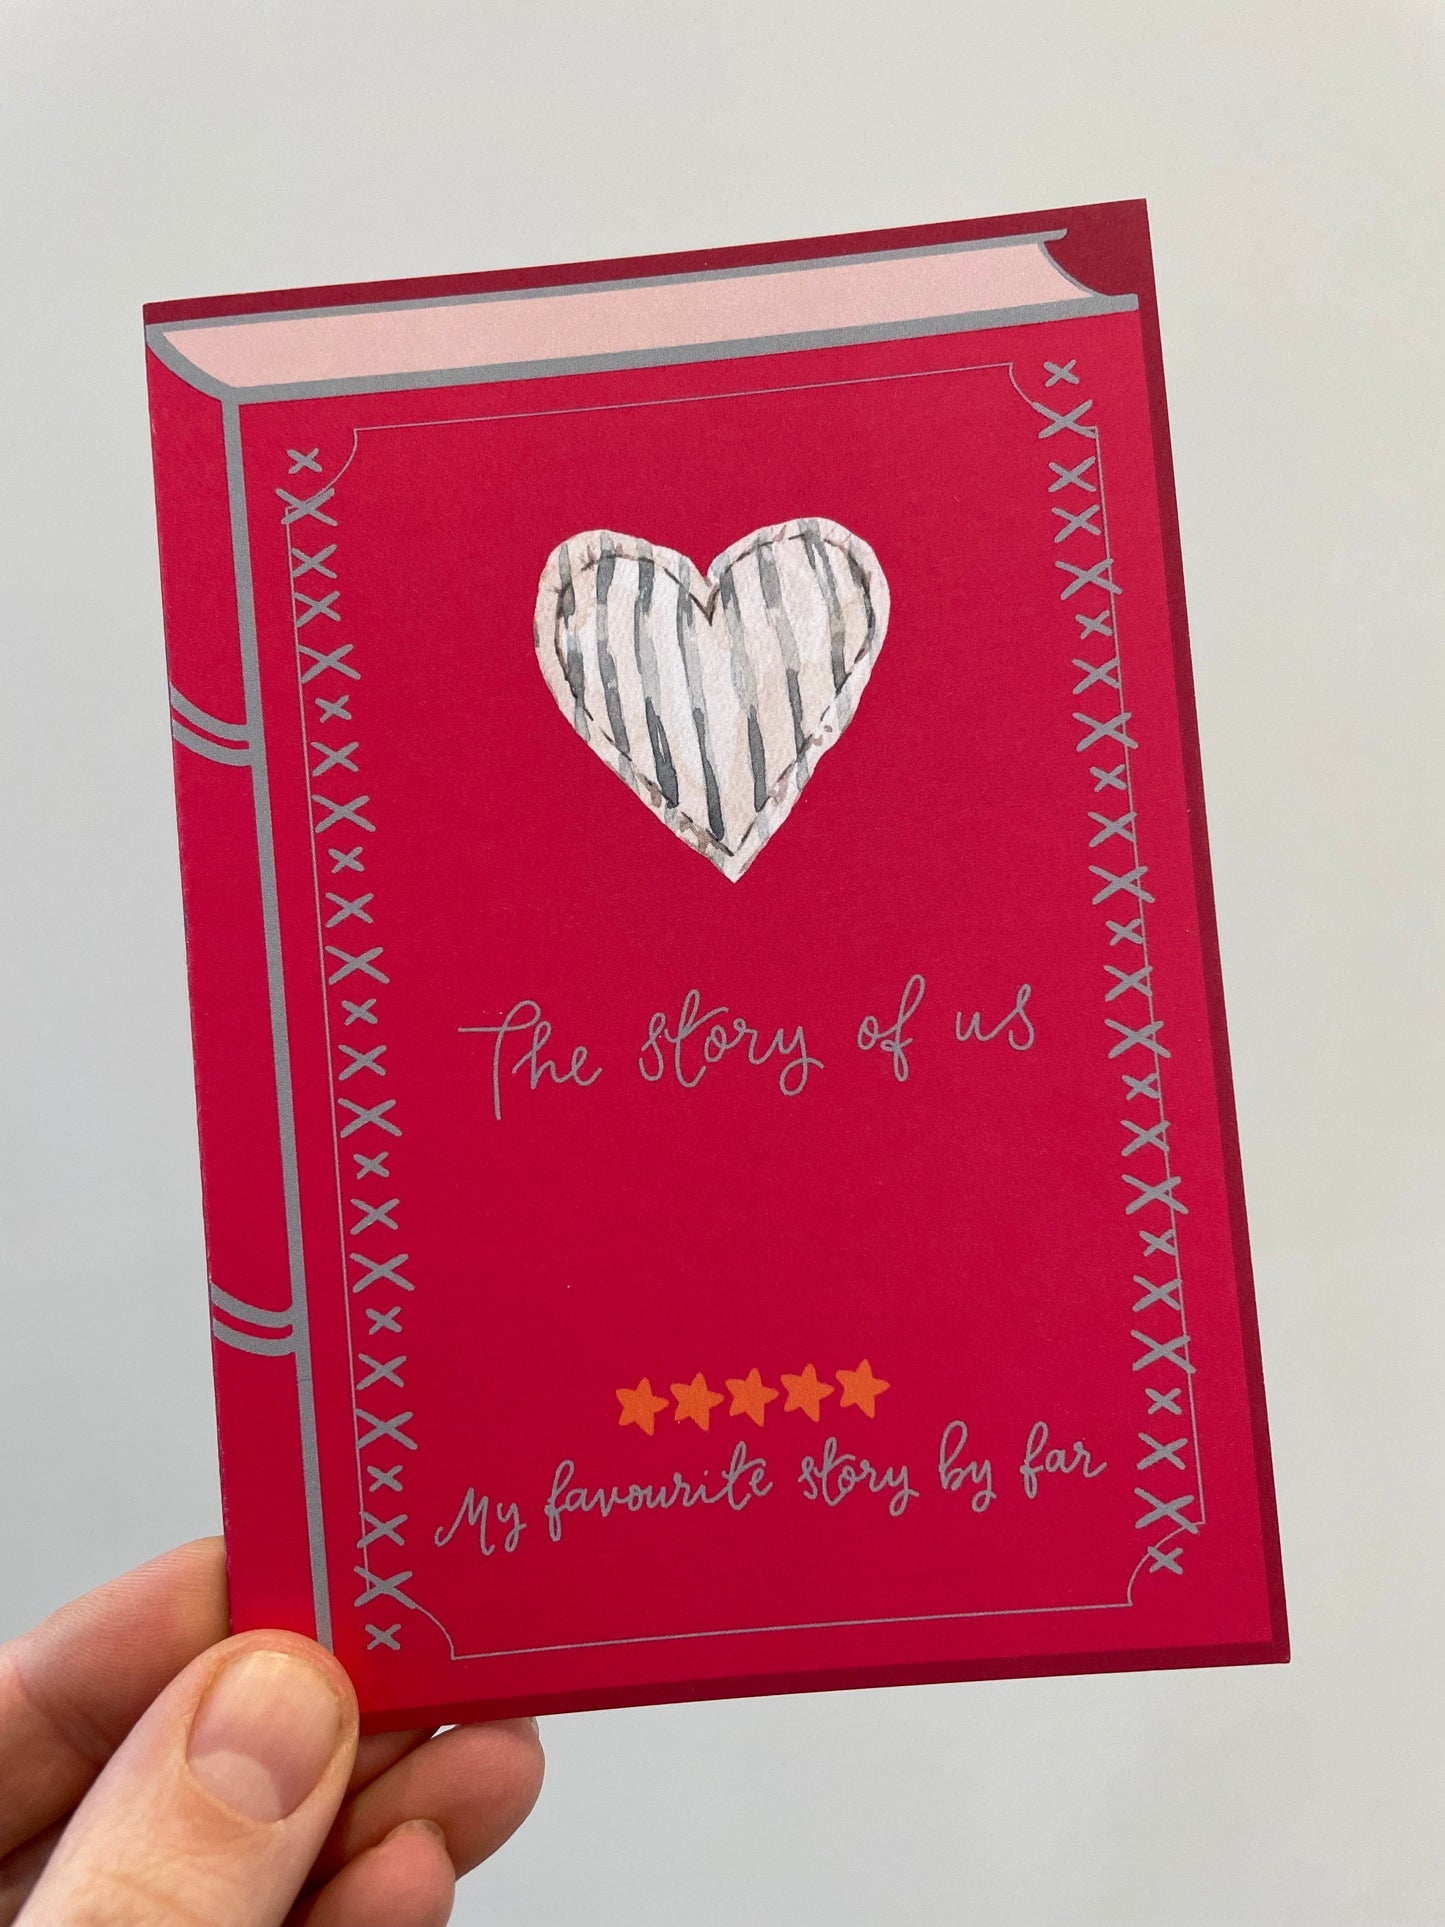 And Hope Designs Cards Book romantic card - The story of us - hot pink